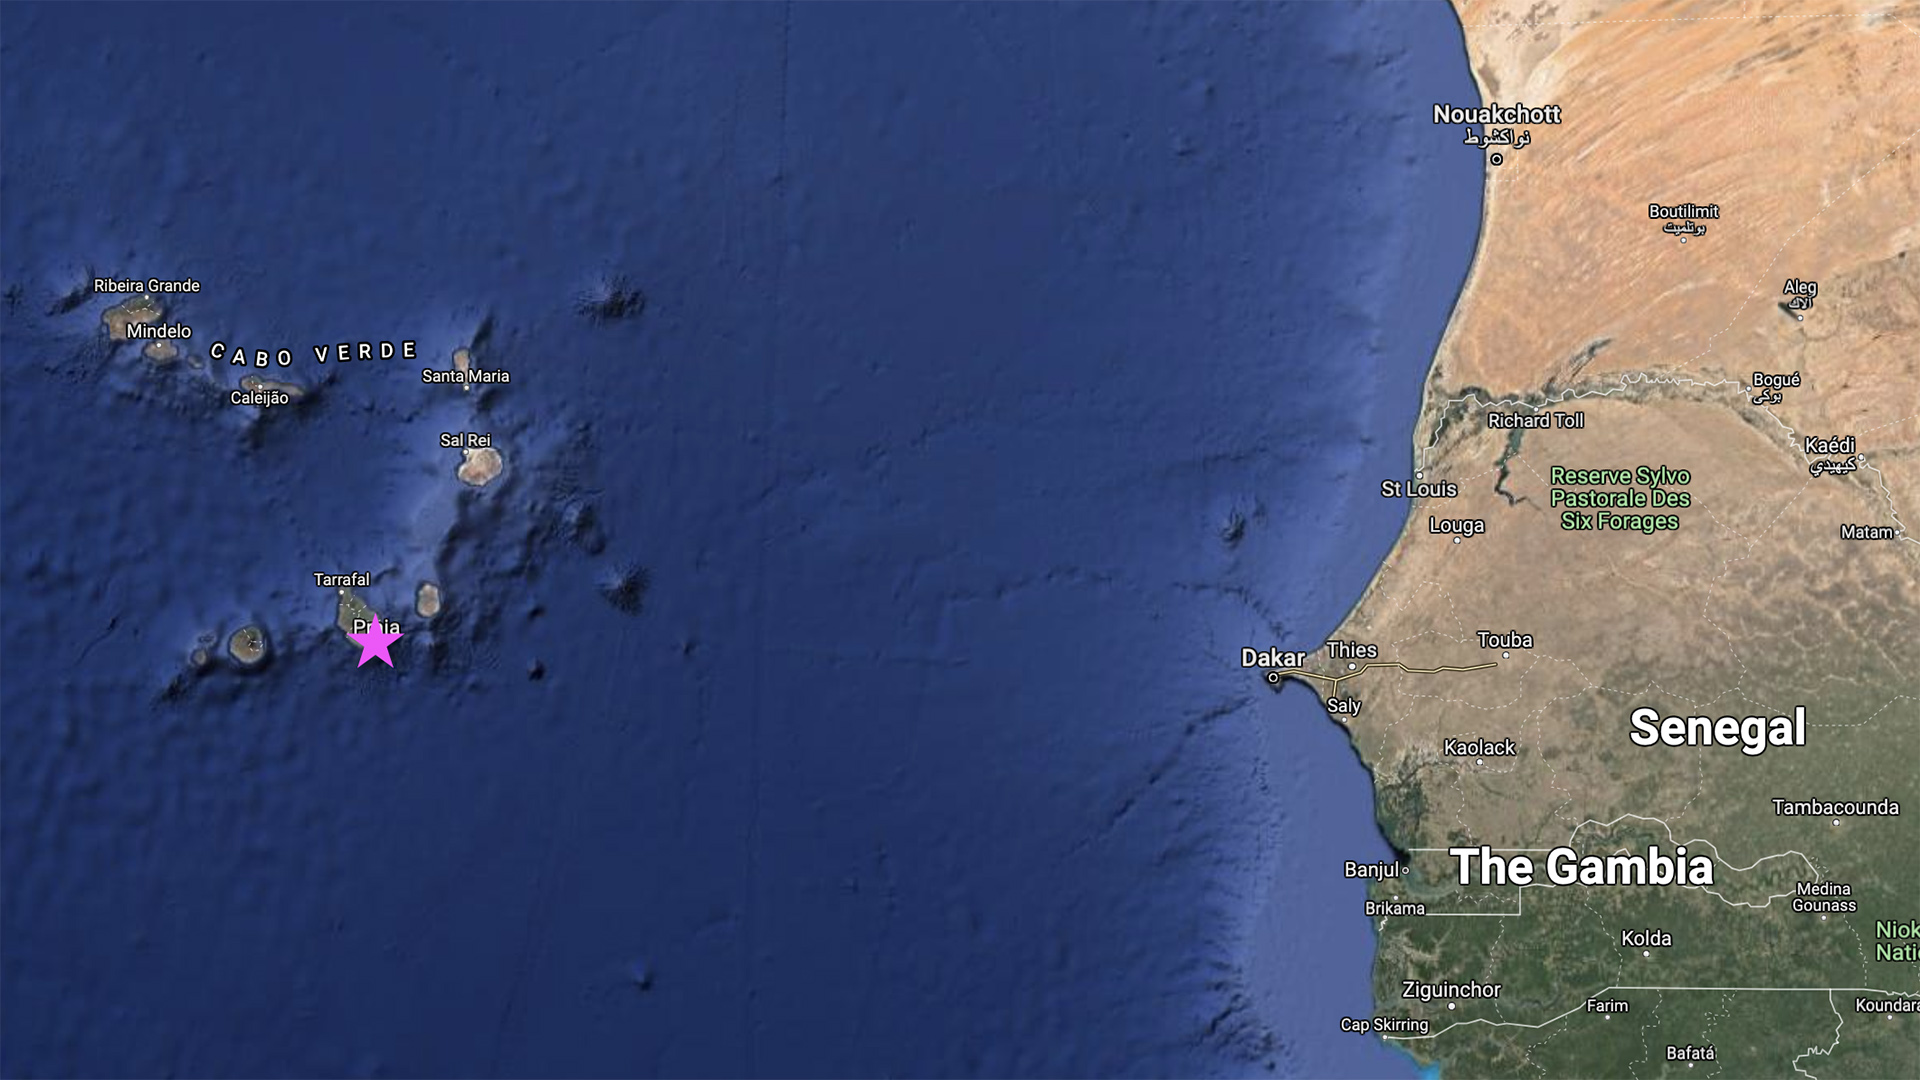 Map of the Cabo Verde archipelago off the coast of Africa. The pink star marks Praia, where the ship is docked. You can see that the islands are at about the same latitude as the Sahara desert.